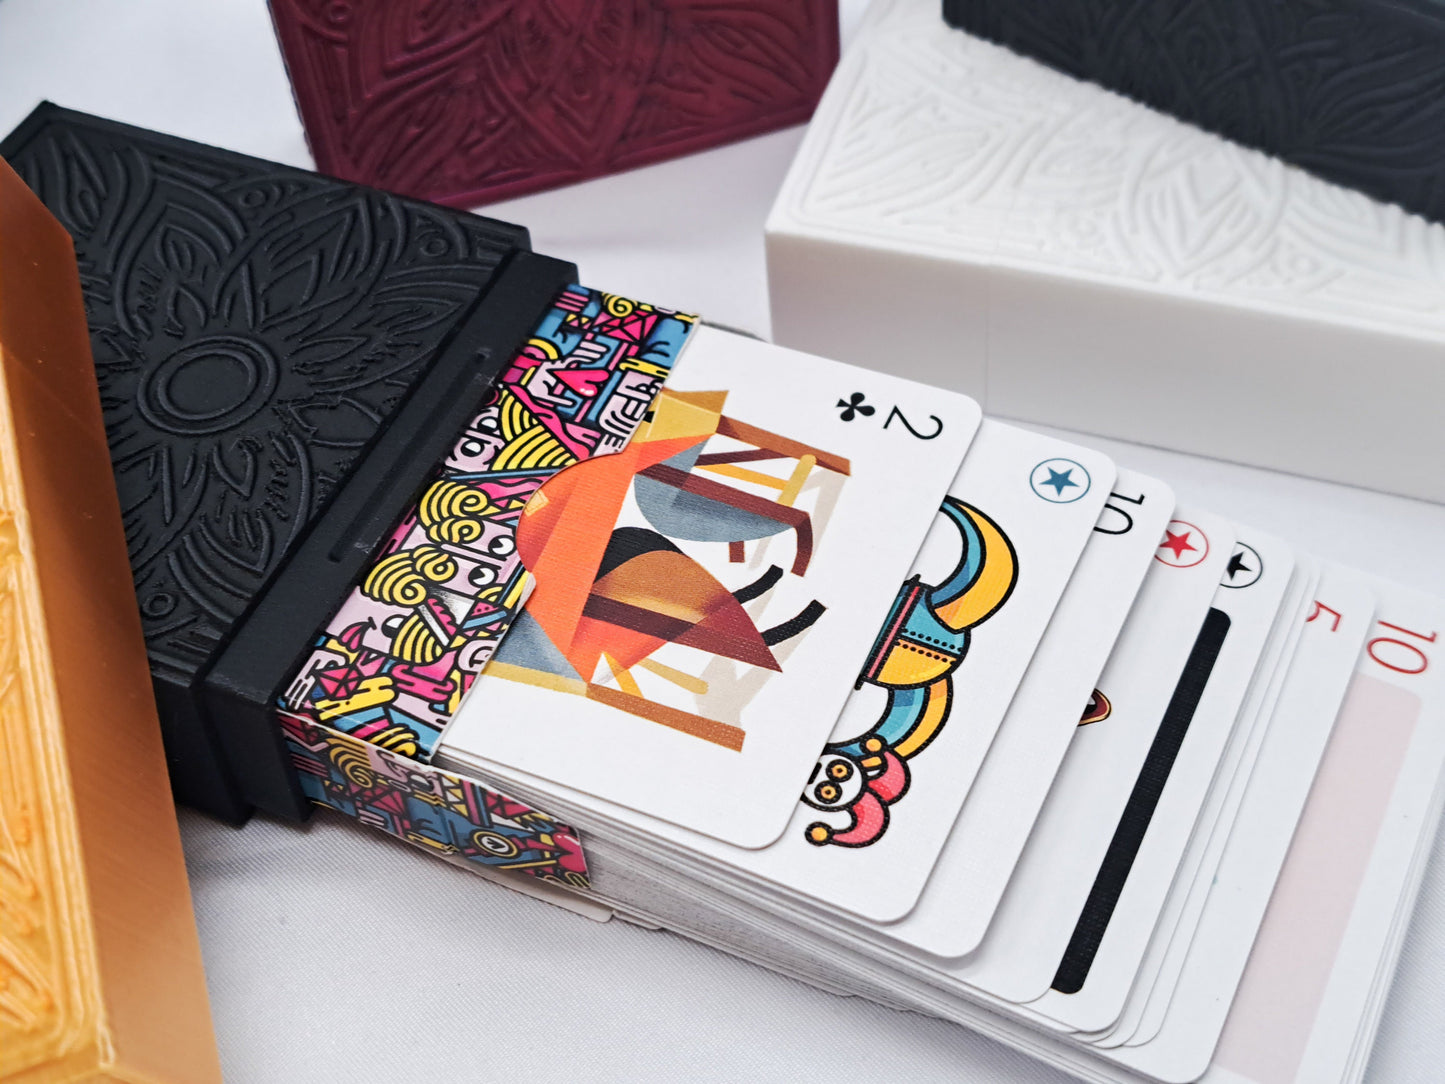 Hard Plastic Playing Card (and Air Cards) Protector Box - Durable, Stylish, and Portable Deck Case